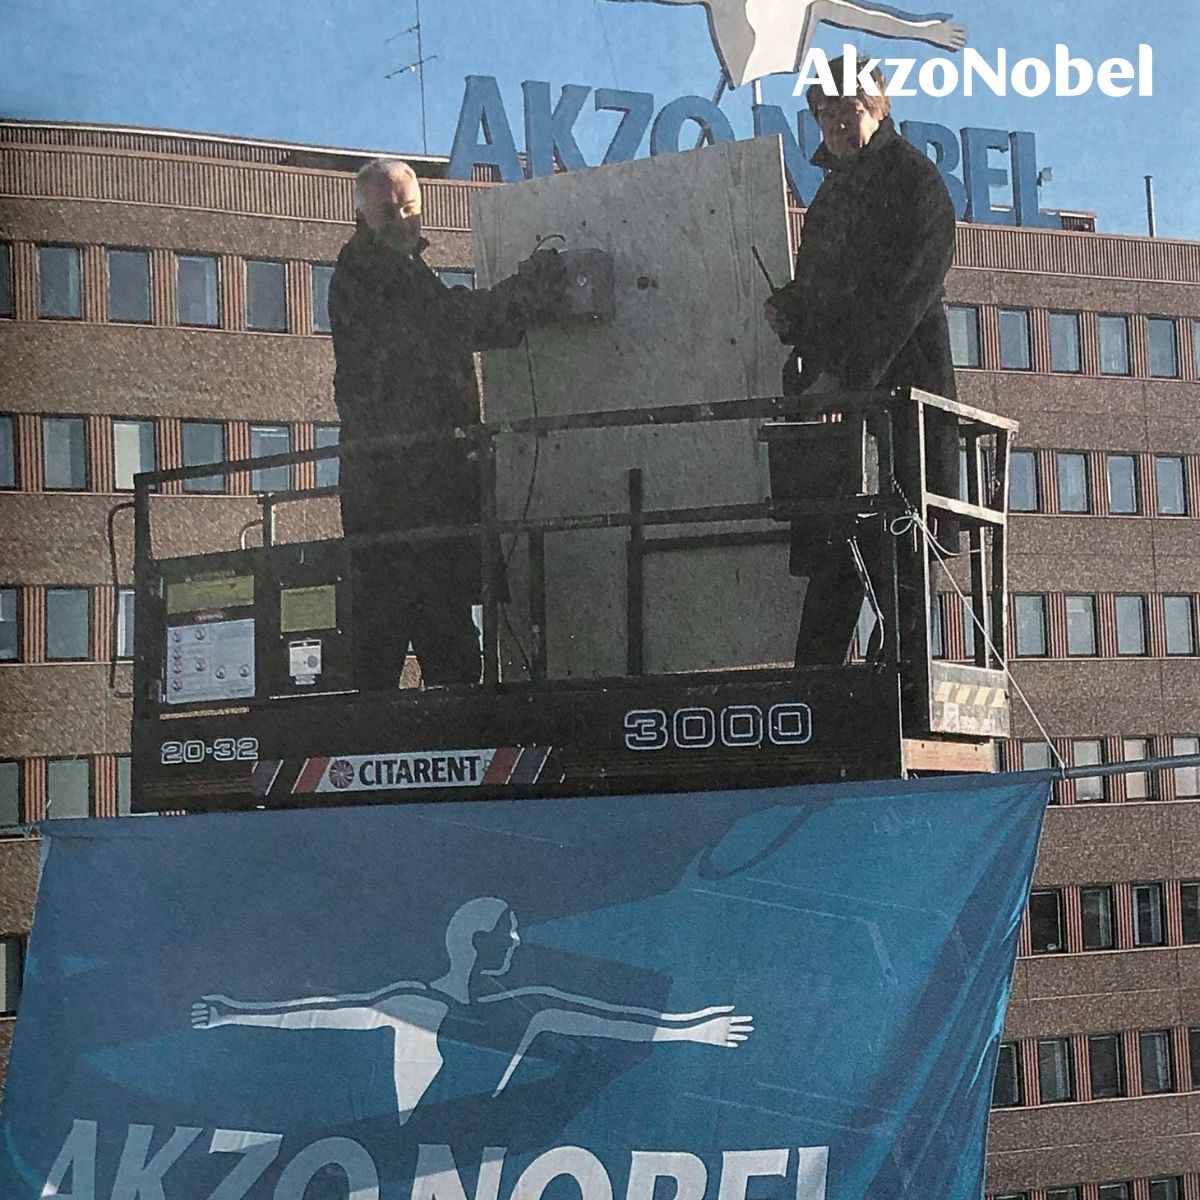 This was the moment in February 1994 when @AkzoNobel officially launched Akzo Nobel following the merger of Akzo and Nobel Industries. Look out for our celebration post featuring colleagues who joined the company exactly 30 years ago – and are still with us. #AkzoNobel